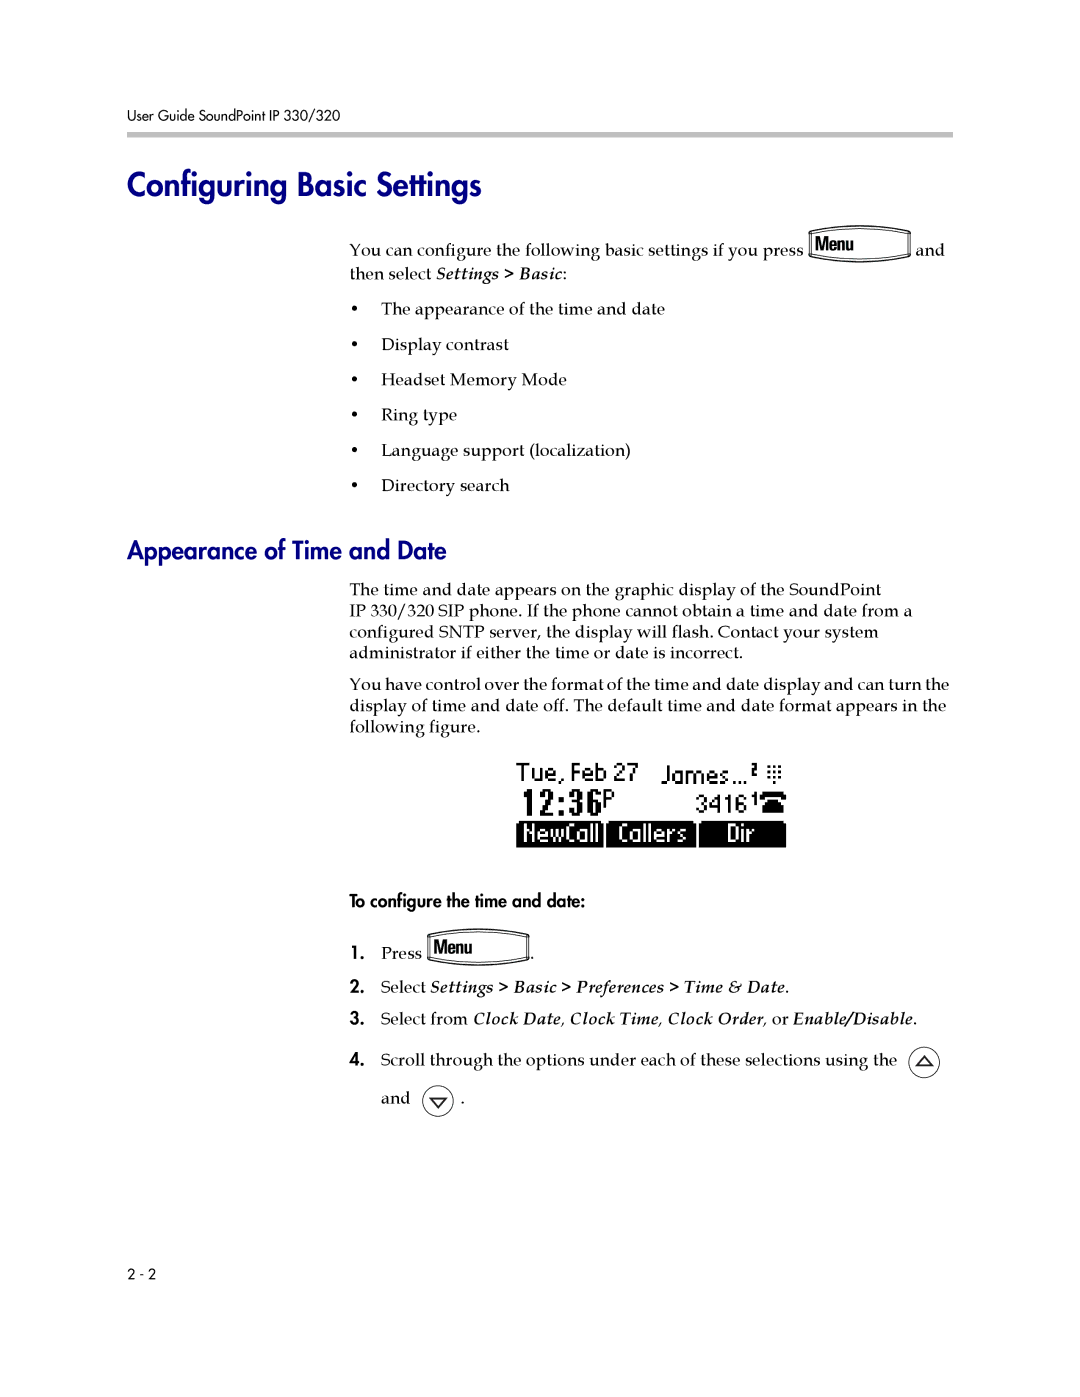 Polycom 330, 320 manual Configuring Basic Settings, Appearance of Time and Date, Then select Settings Basic 